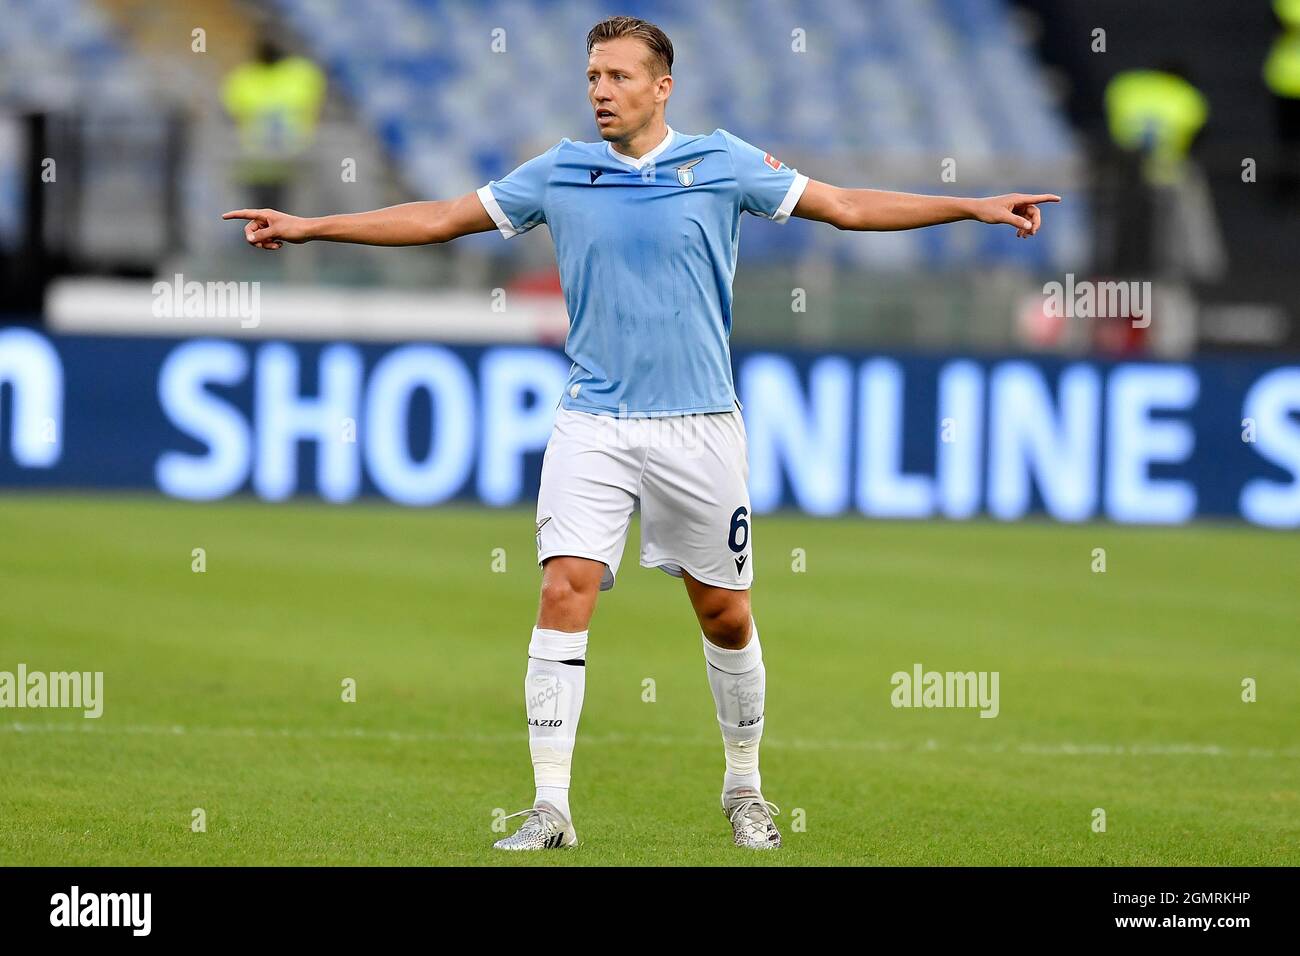 Roma, Italy. 19th Sep, 2021. Lucas Leiva of SS Lazio reacts during the  Serie A football match between SS Lazio and Cagliari Calcio at Olimpico  stadium in Rome (Italy), September 19th, 2021.